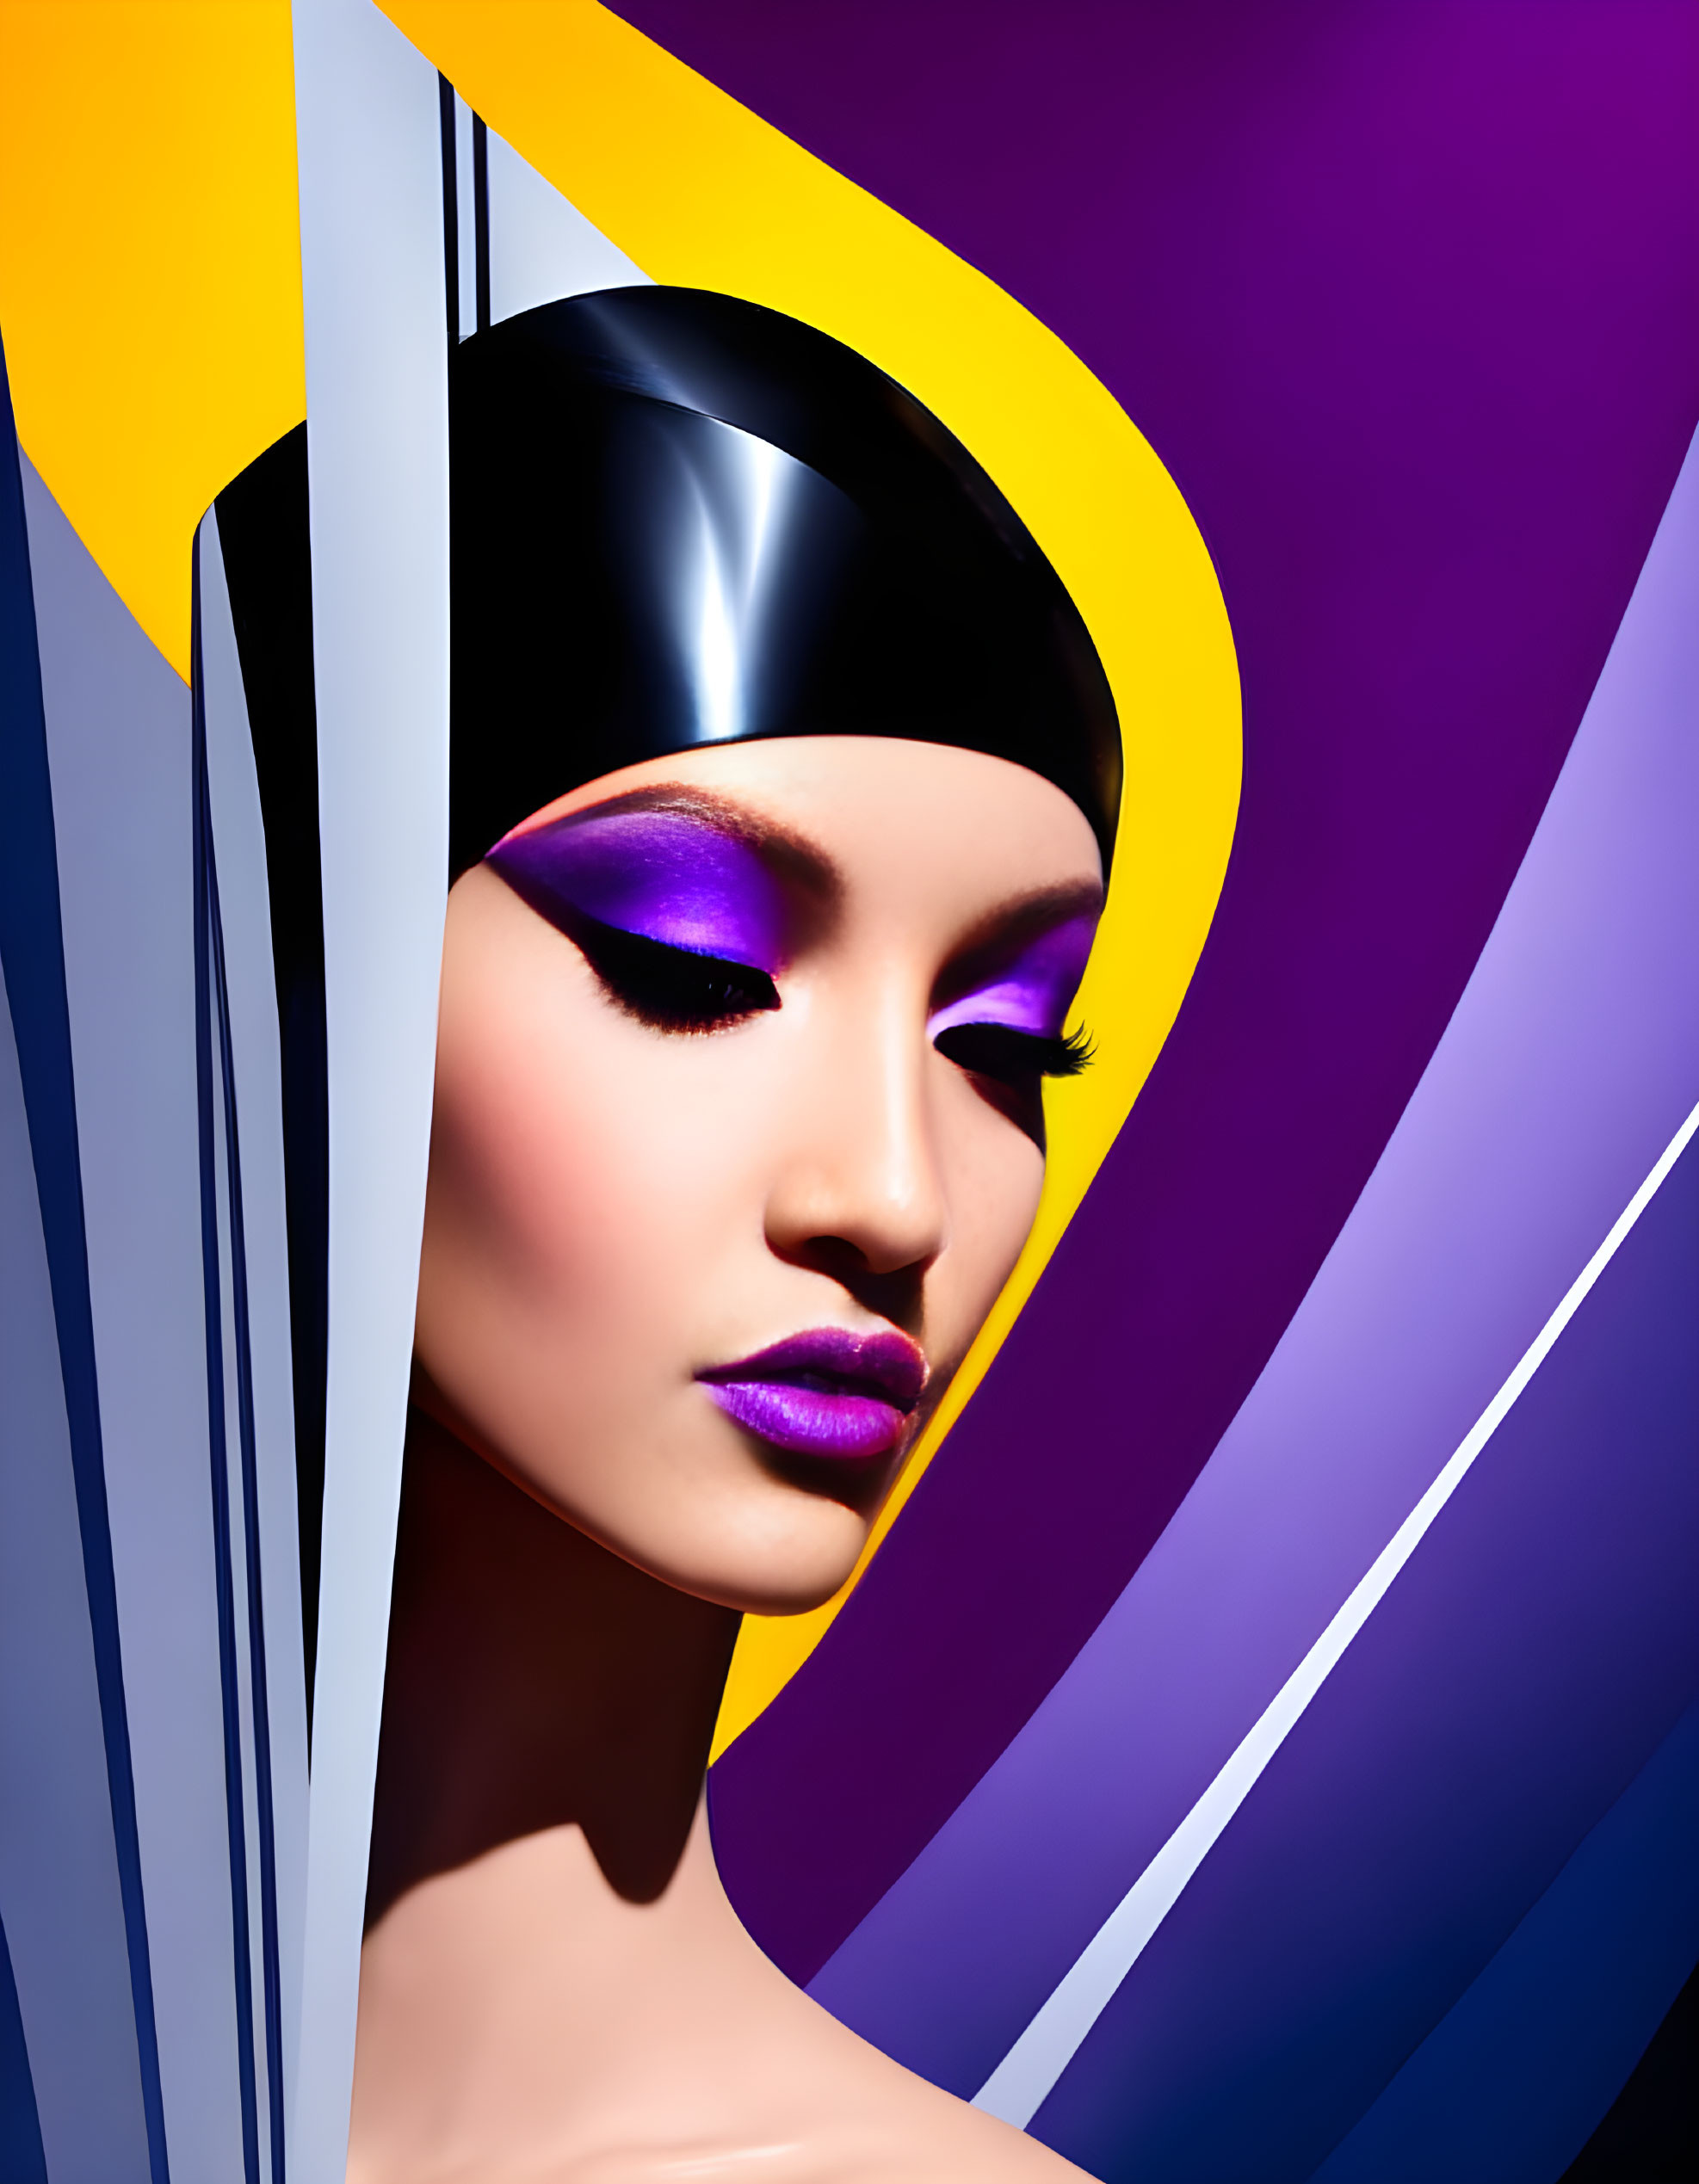 Portrait of a person with bold purple makeup and black headpiece against vibrant background